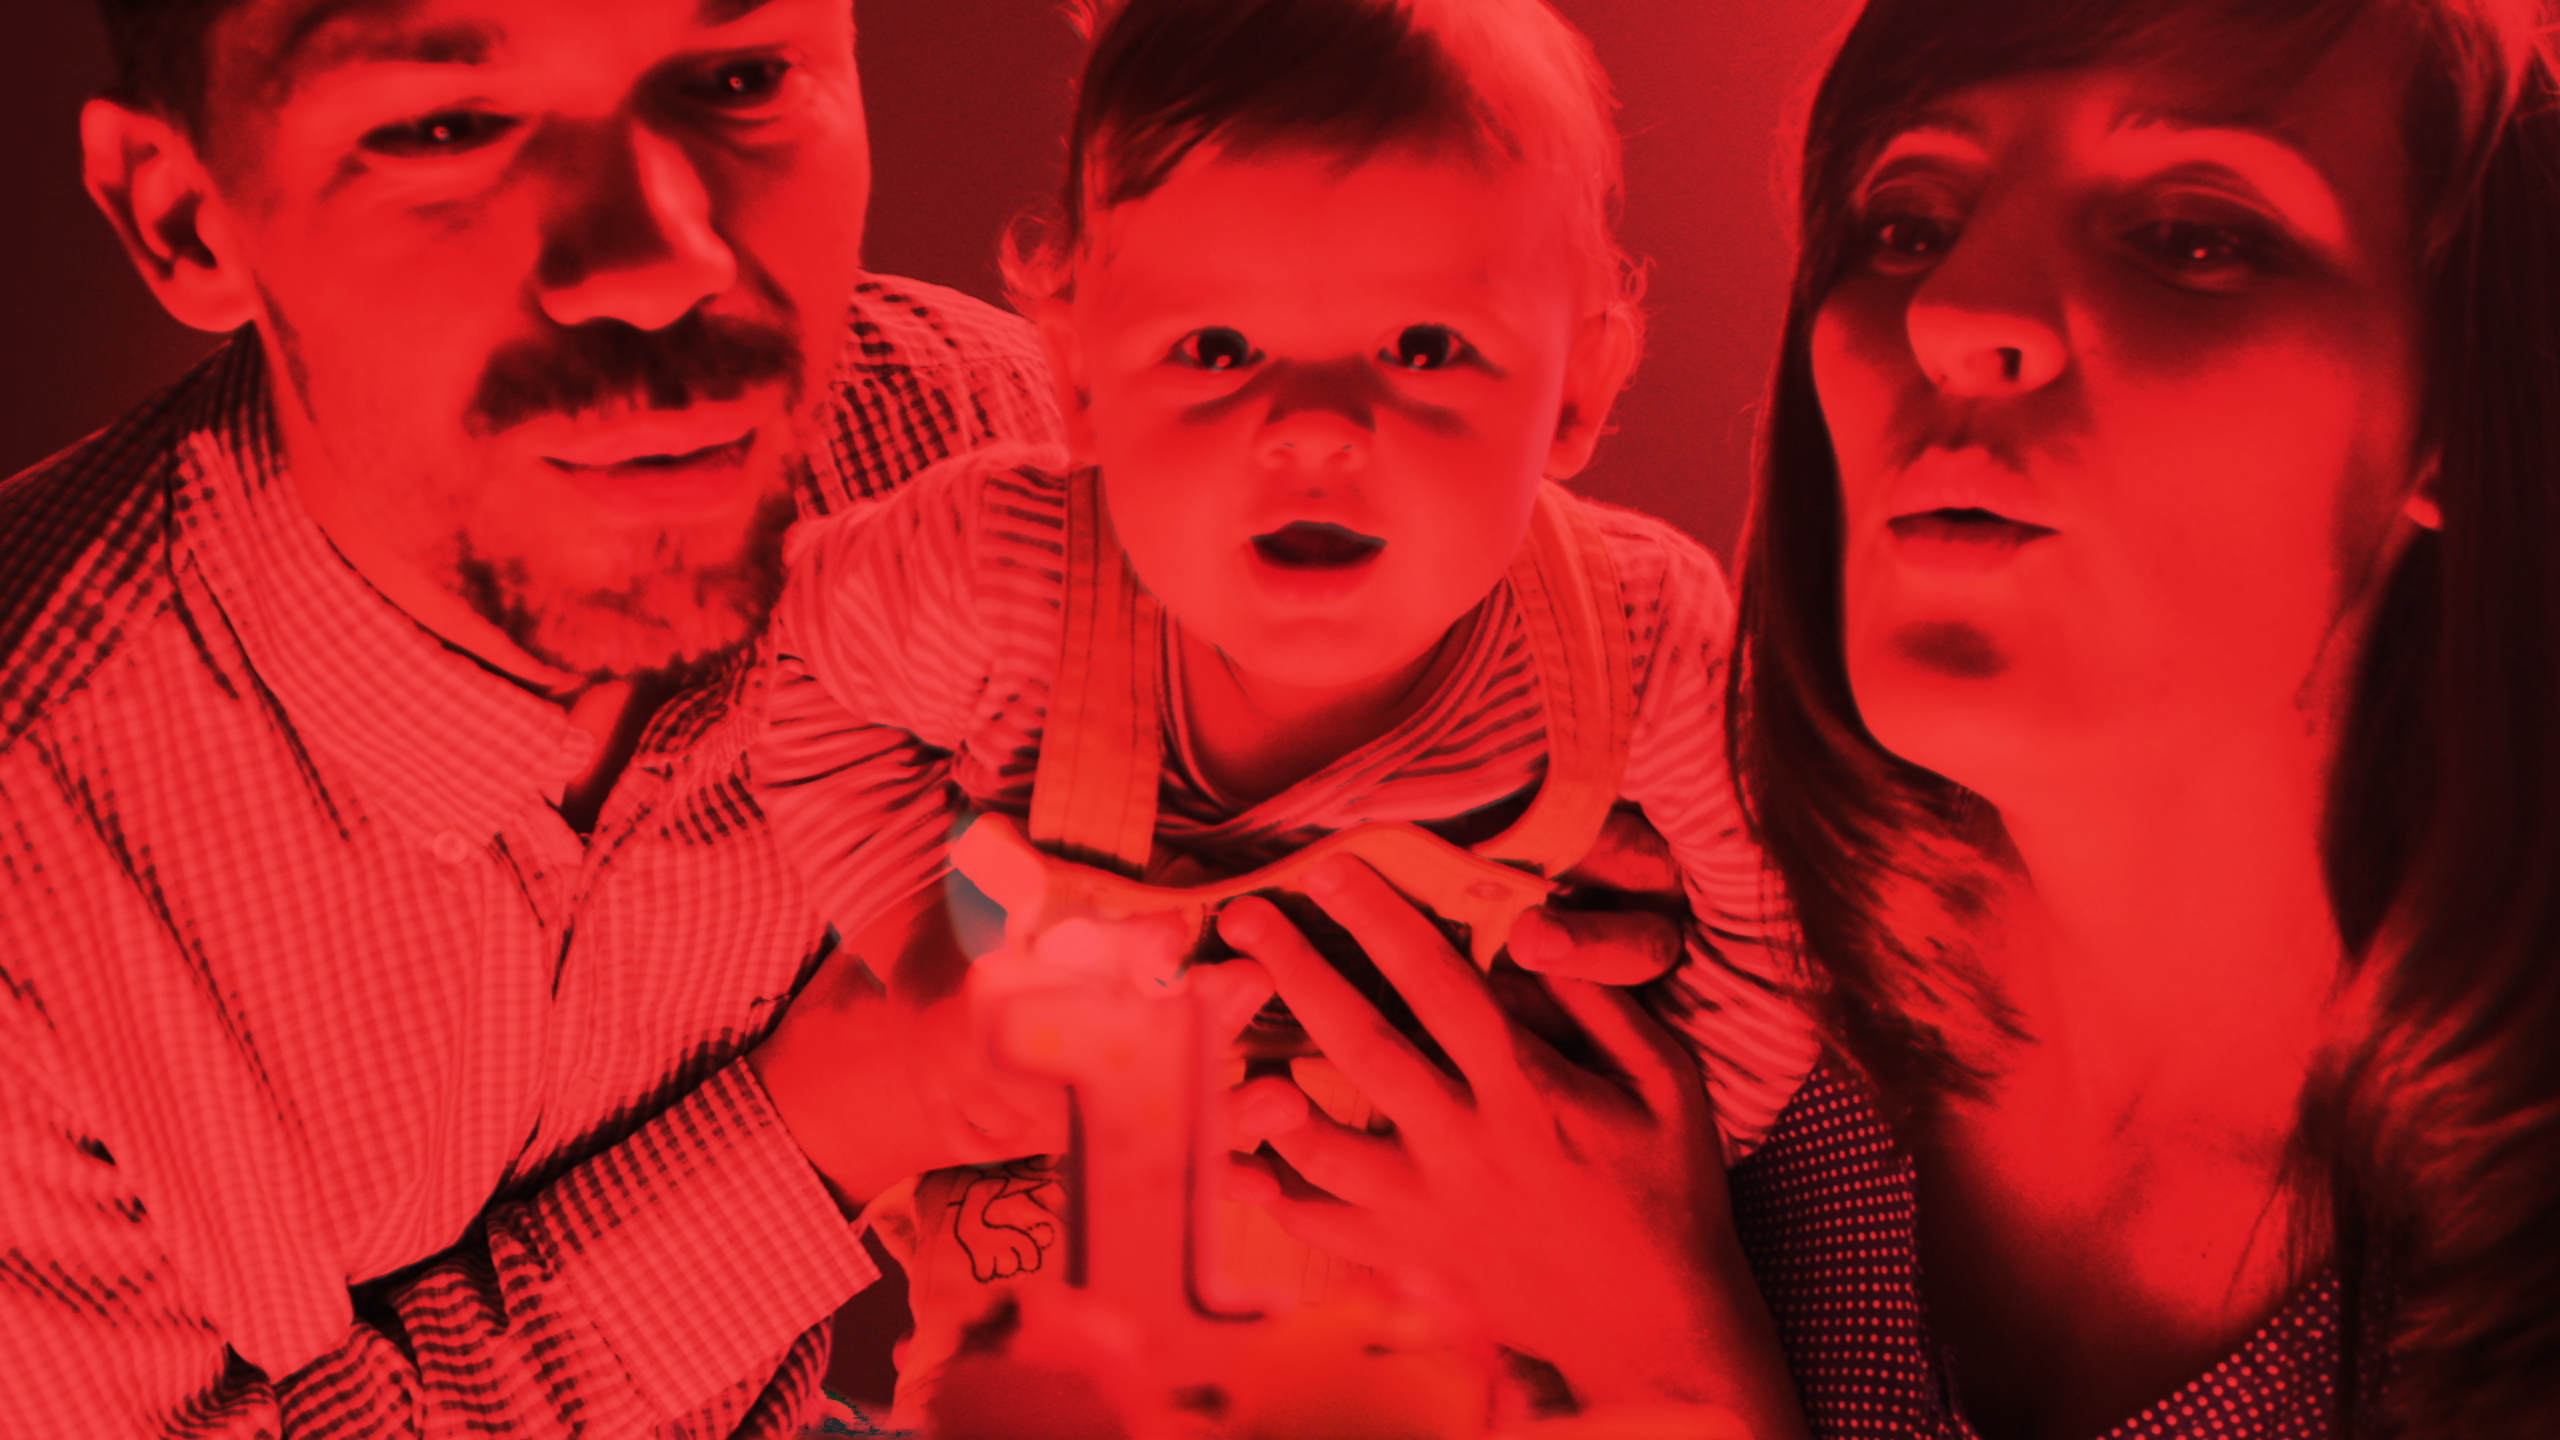 Image tinted red, a man and woman hold their infant. Together, they blow out the one-shaped birthday candle.